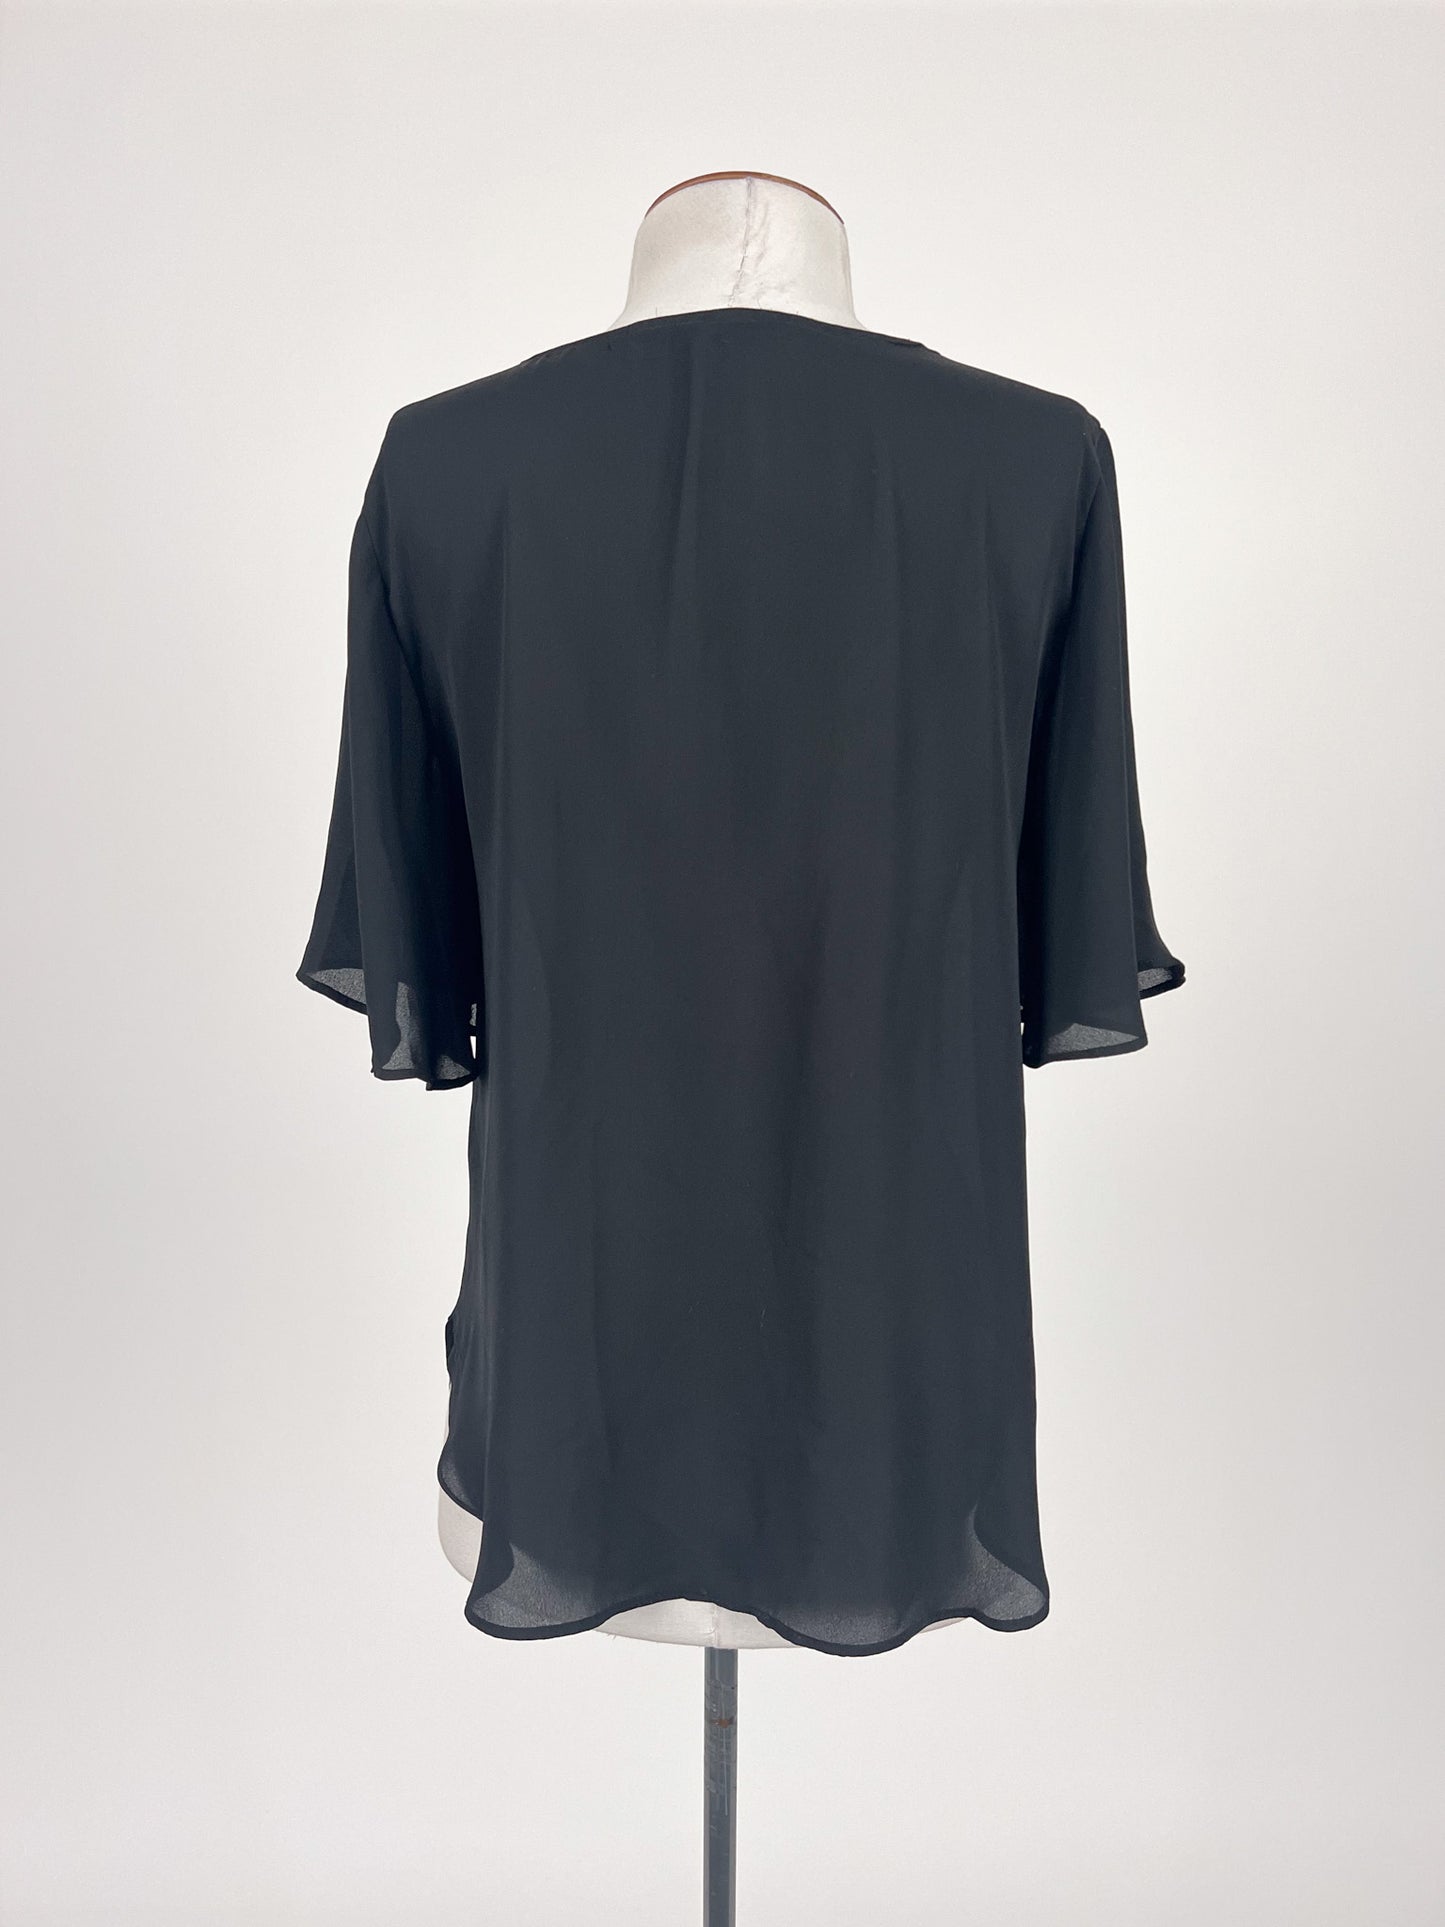 Glassons | Black Workwear Top | Size 8